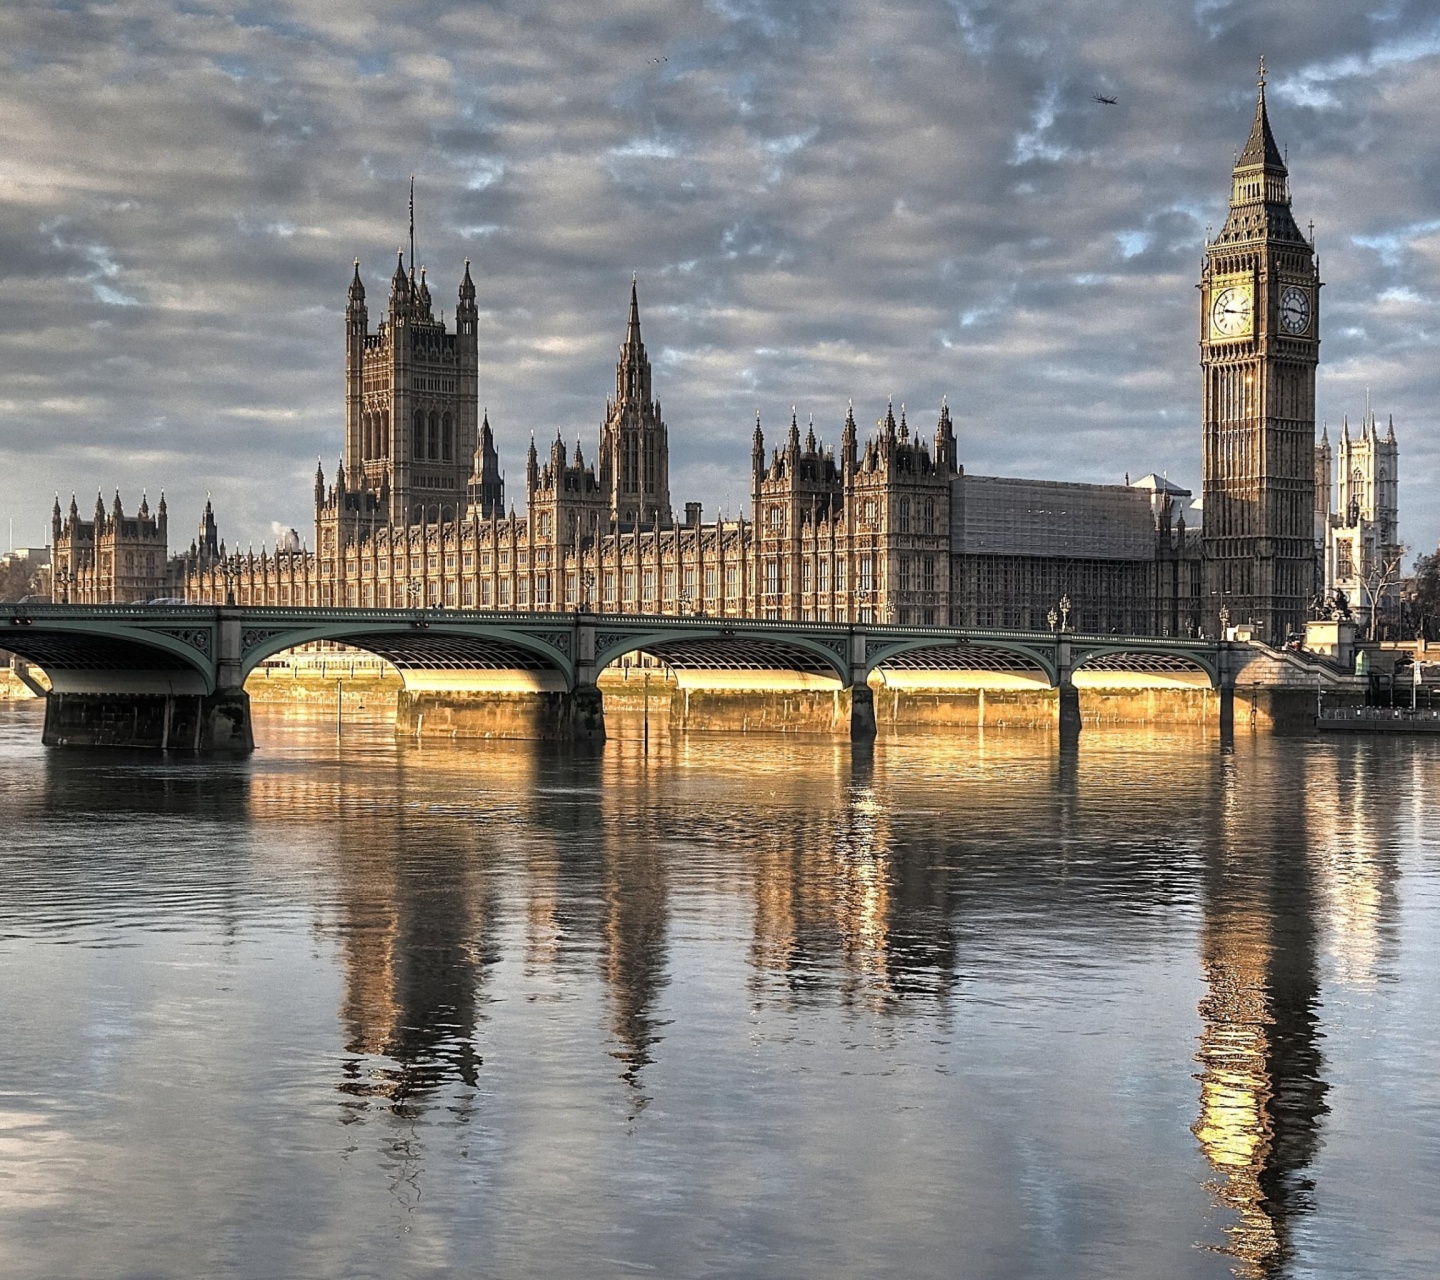 Palace of Westminster in London screenshot #1 1440x1280